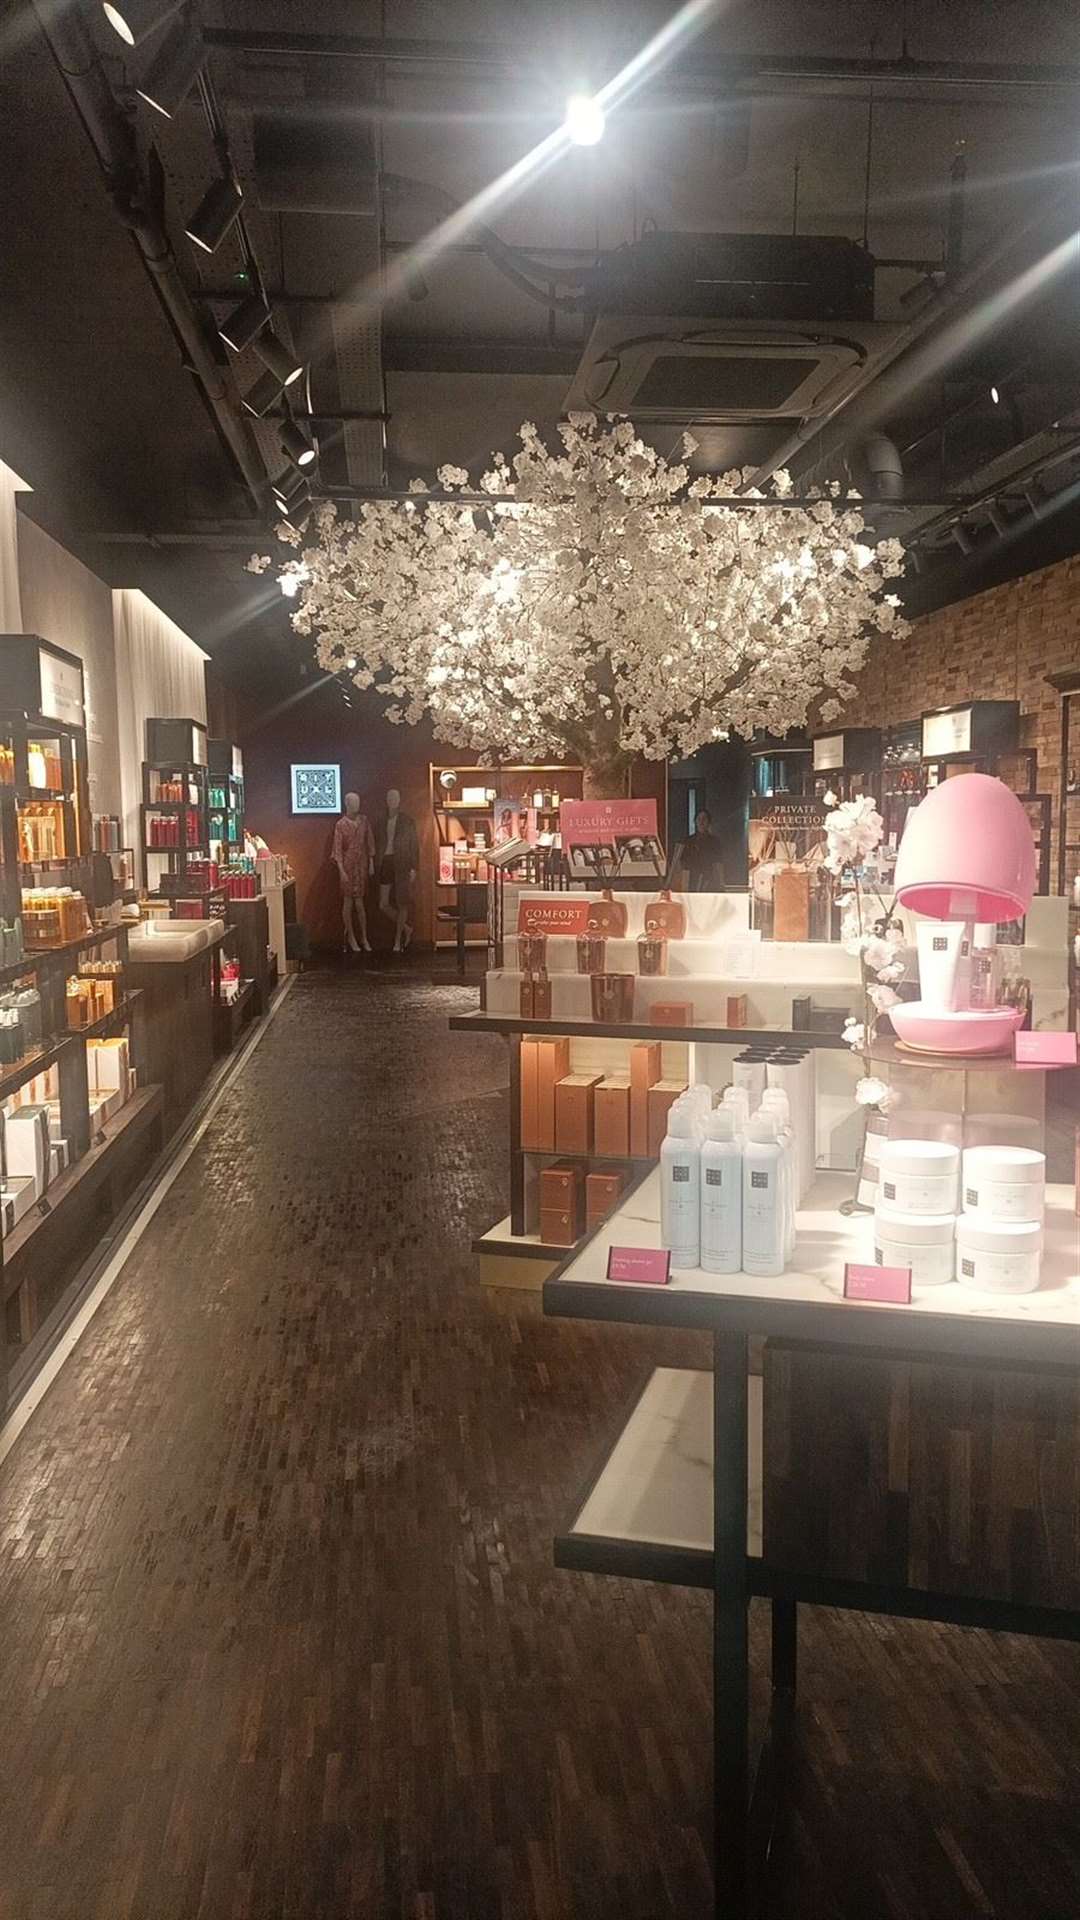 The cherry blossom tree in the store signifies new beginnings.